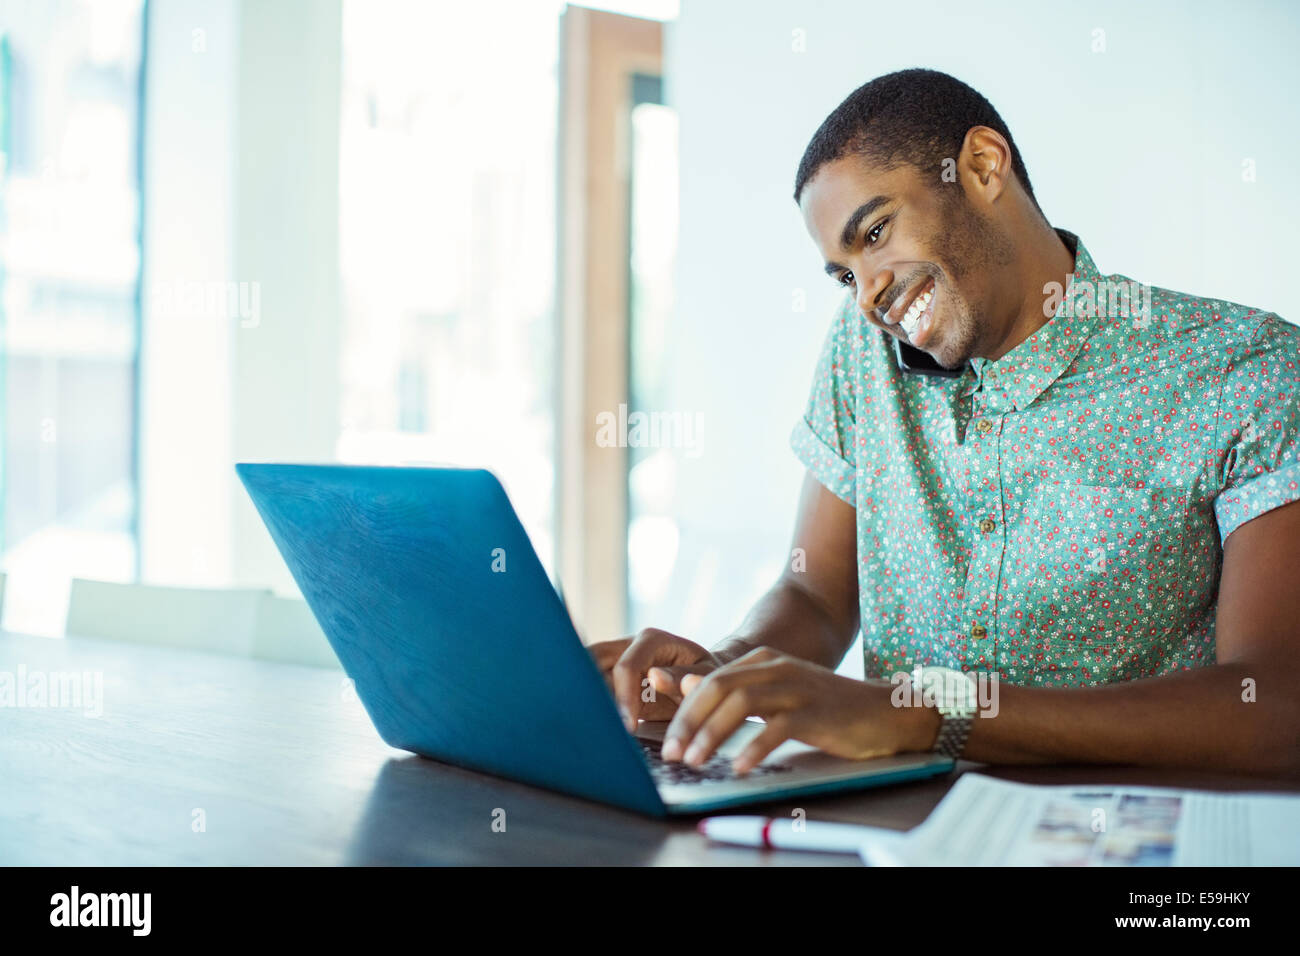 Man using laptop at desk in office Banque D'Images